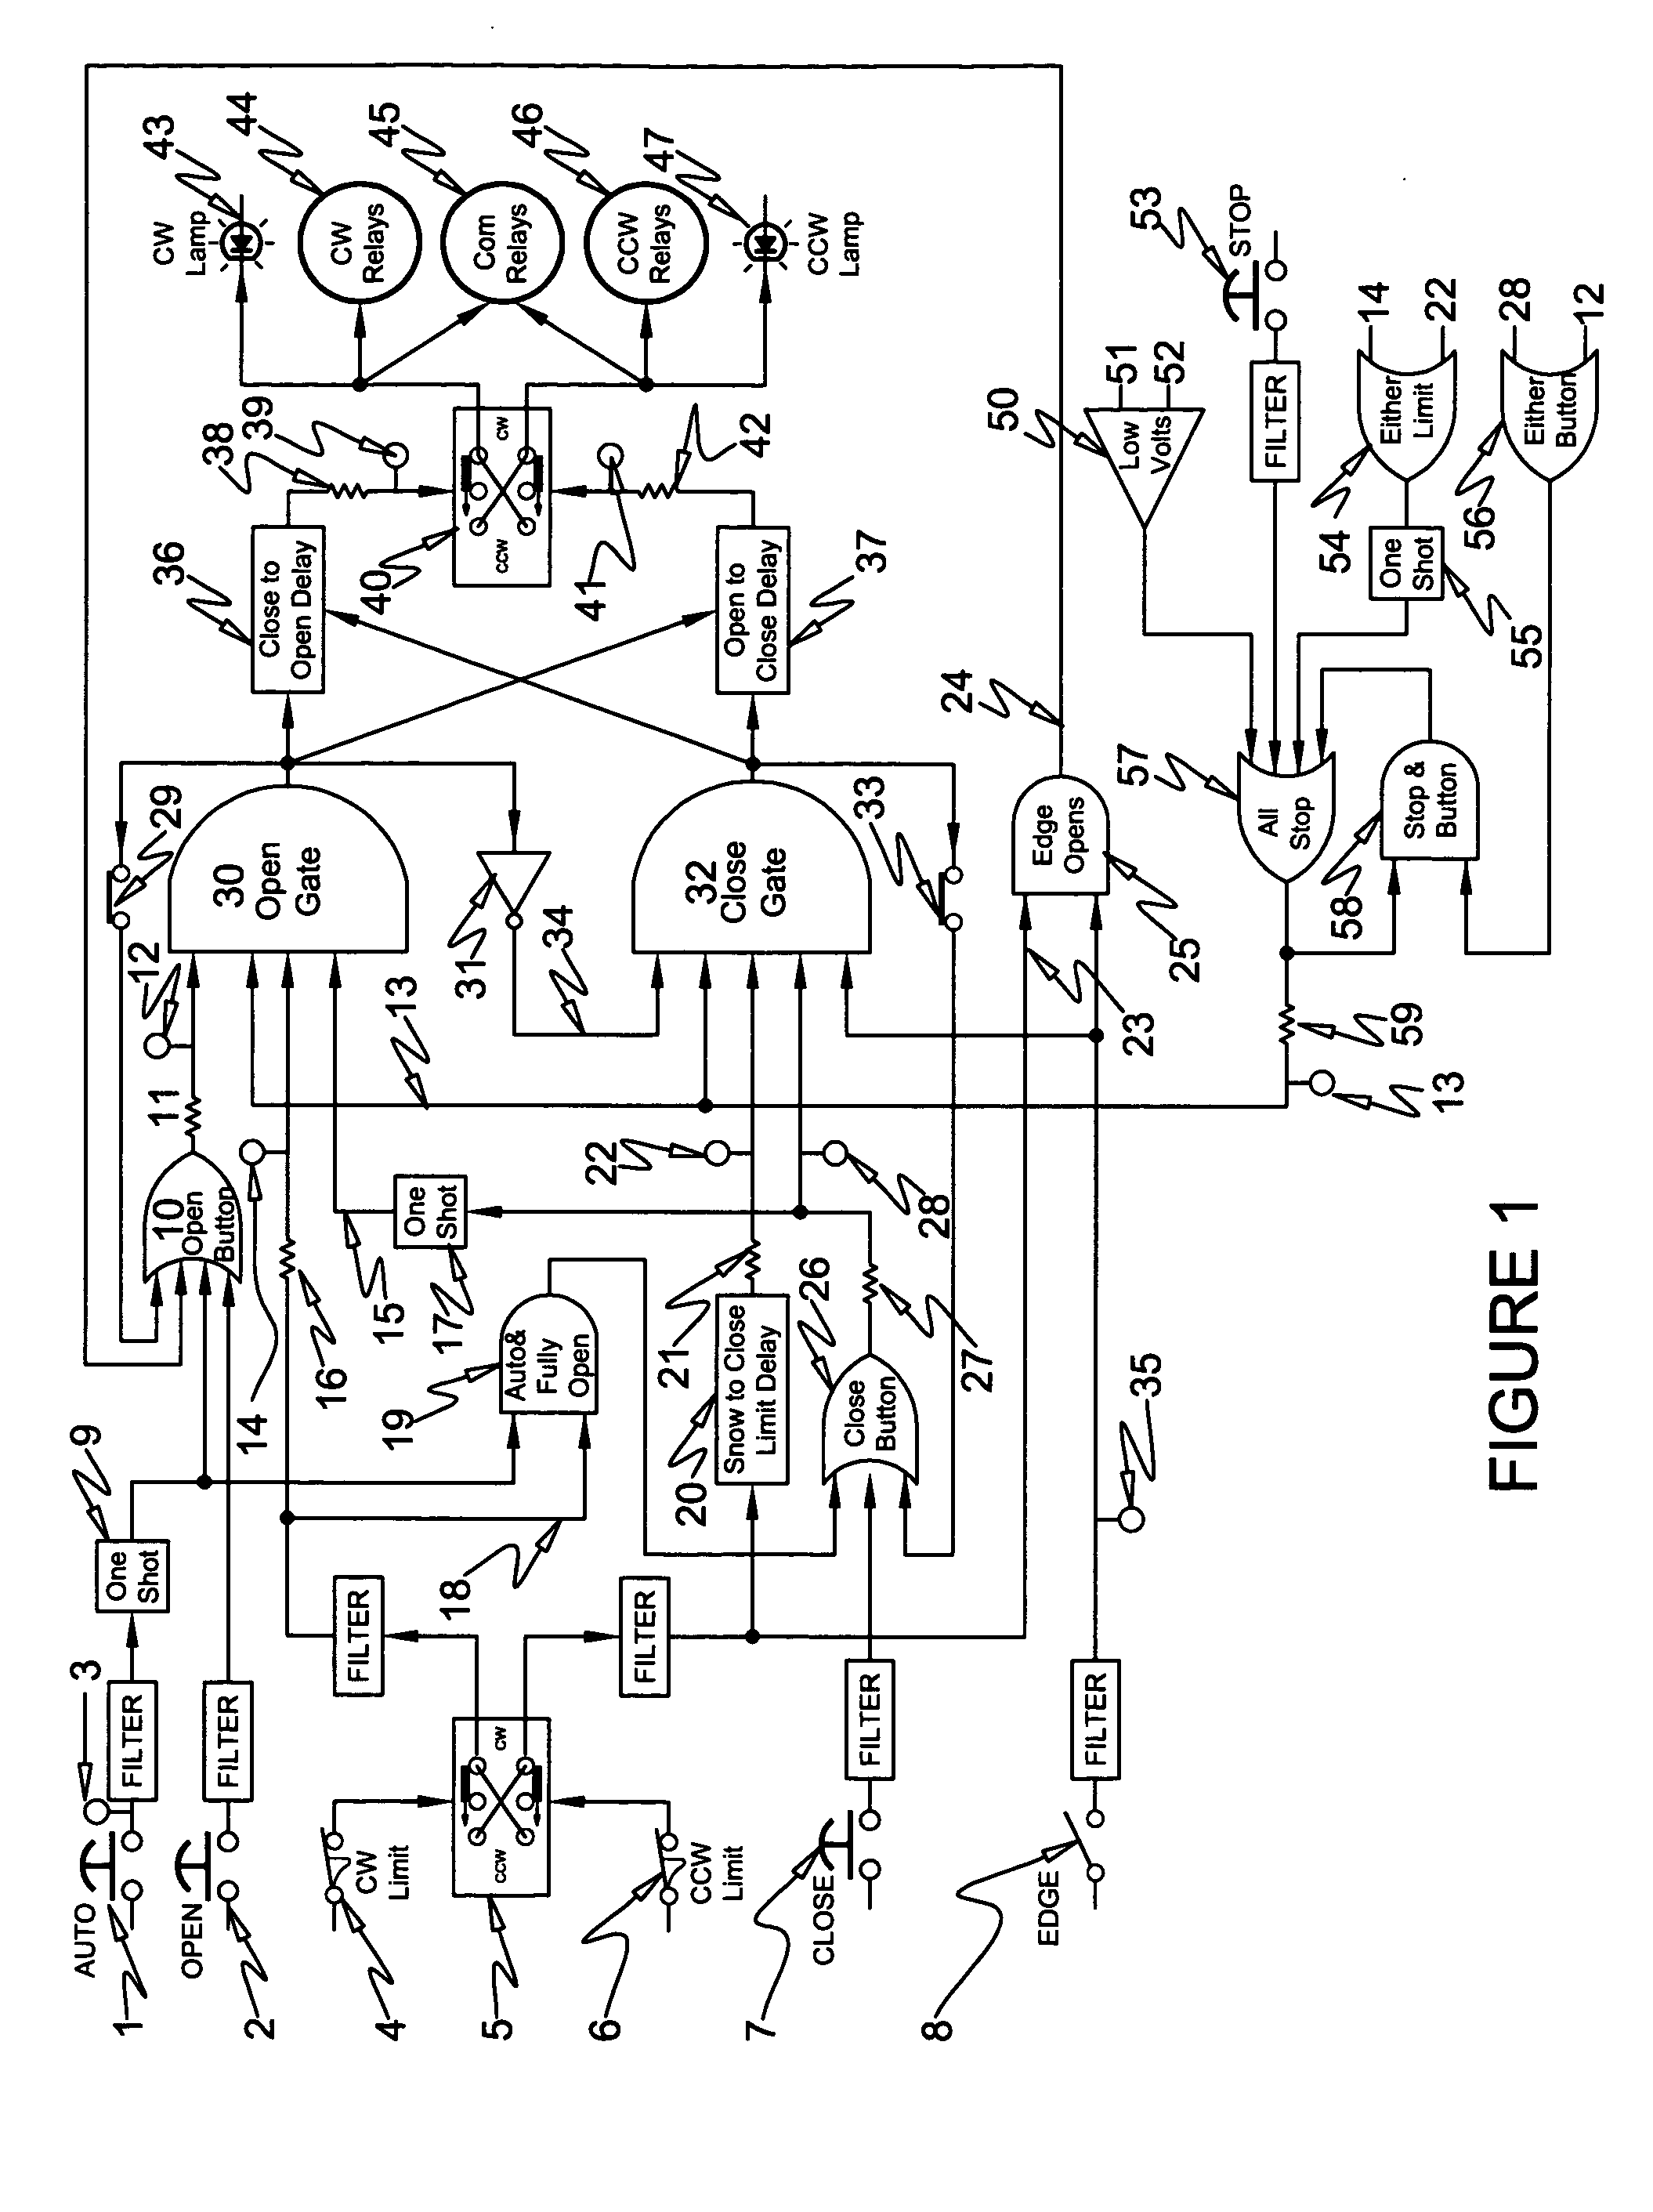 Electronic industrial motor operator control system